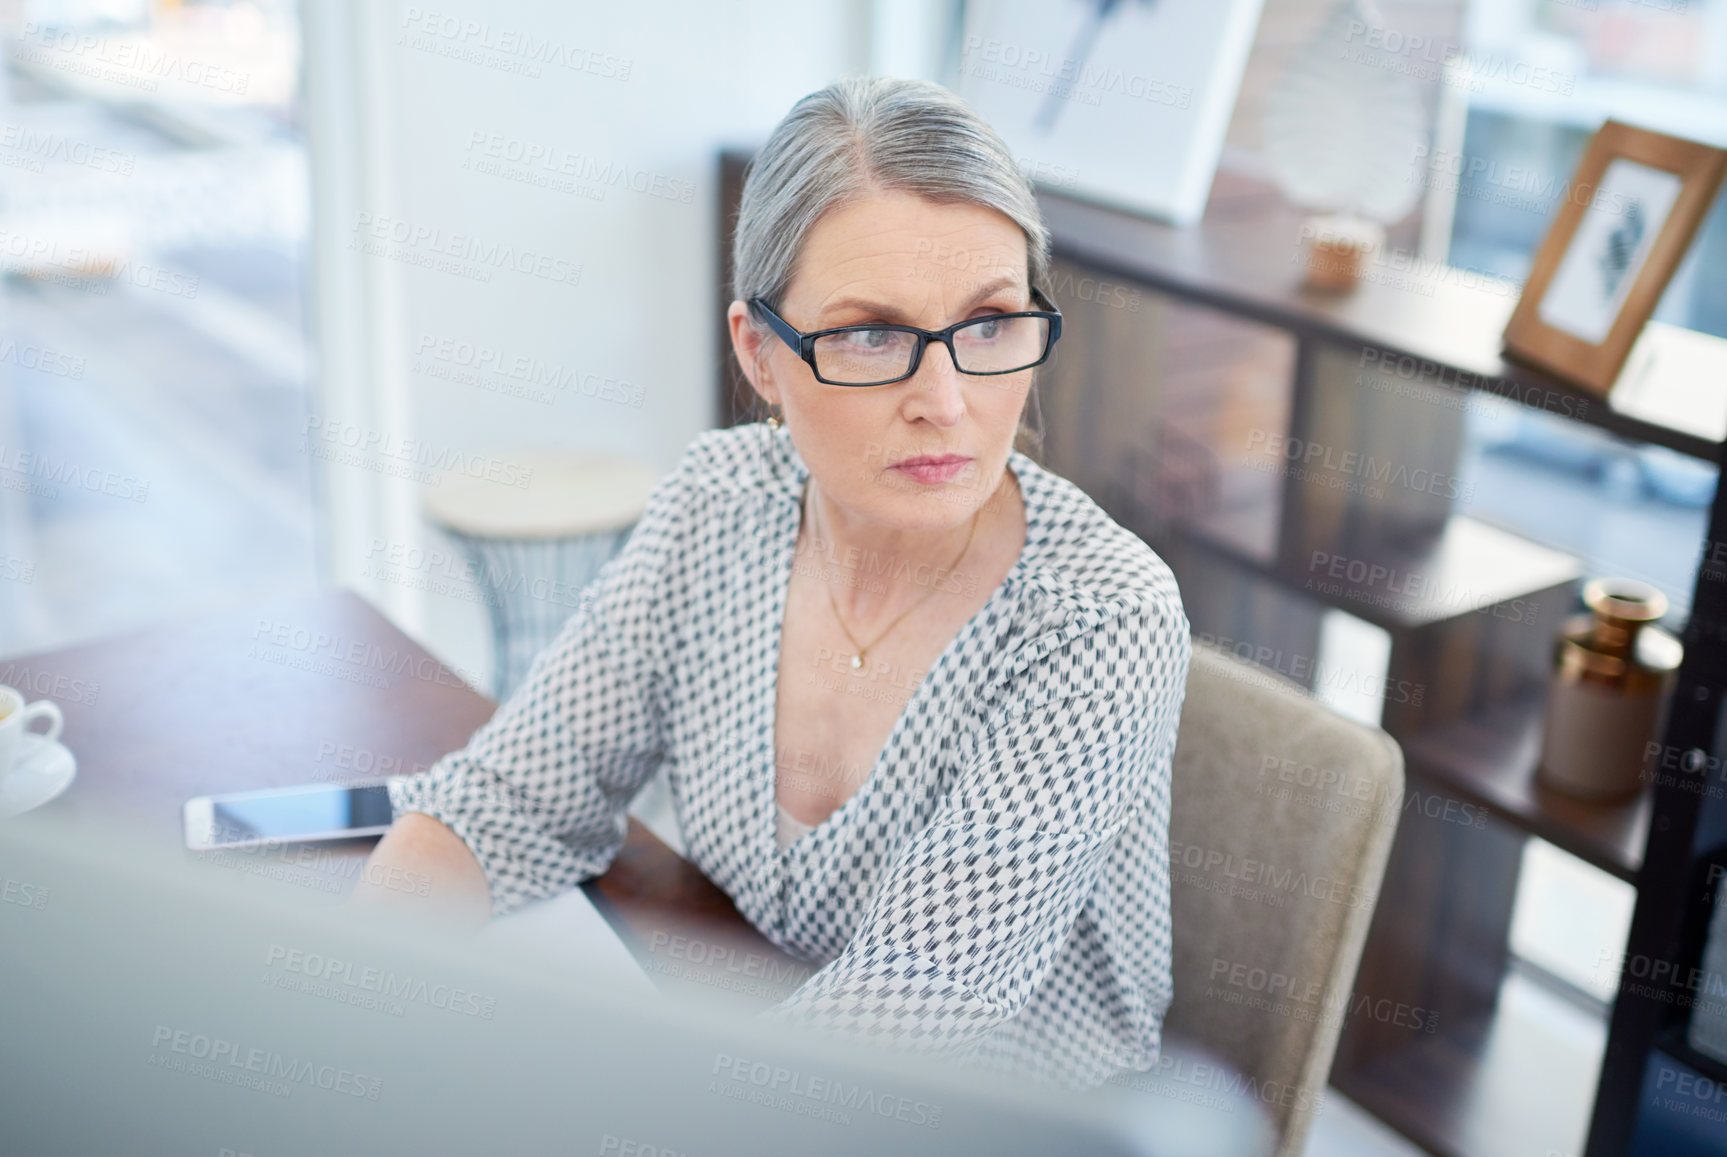 Buy stock photo Shot of a mature businesswoman looking thoughtful while working on a computer in an office